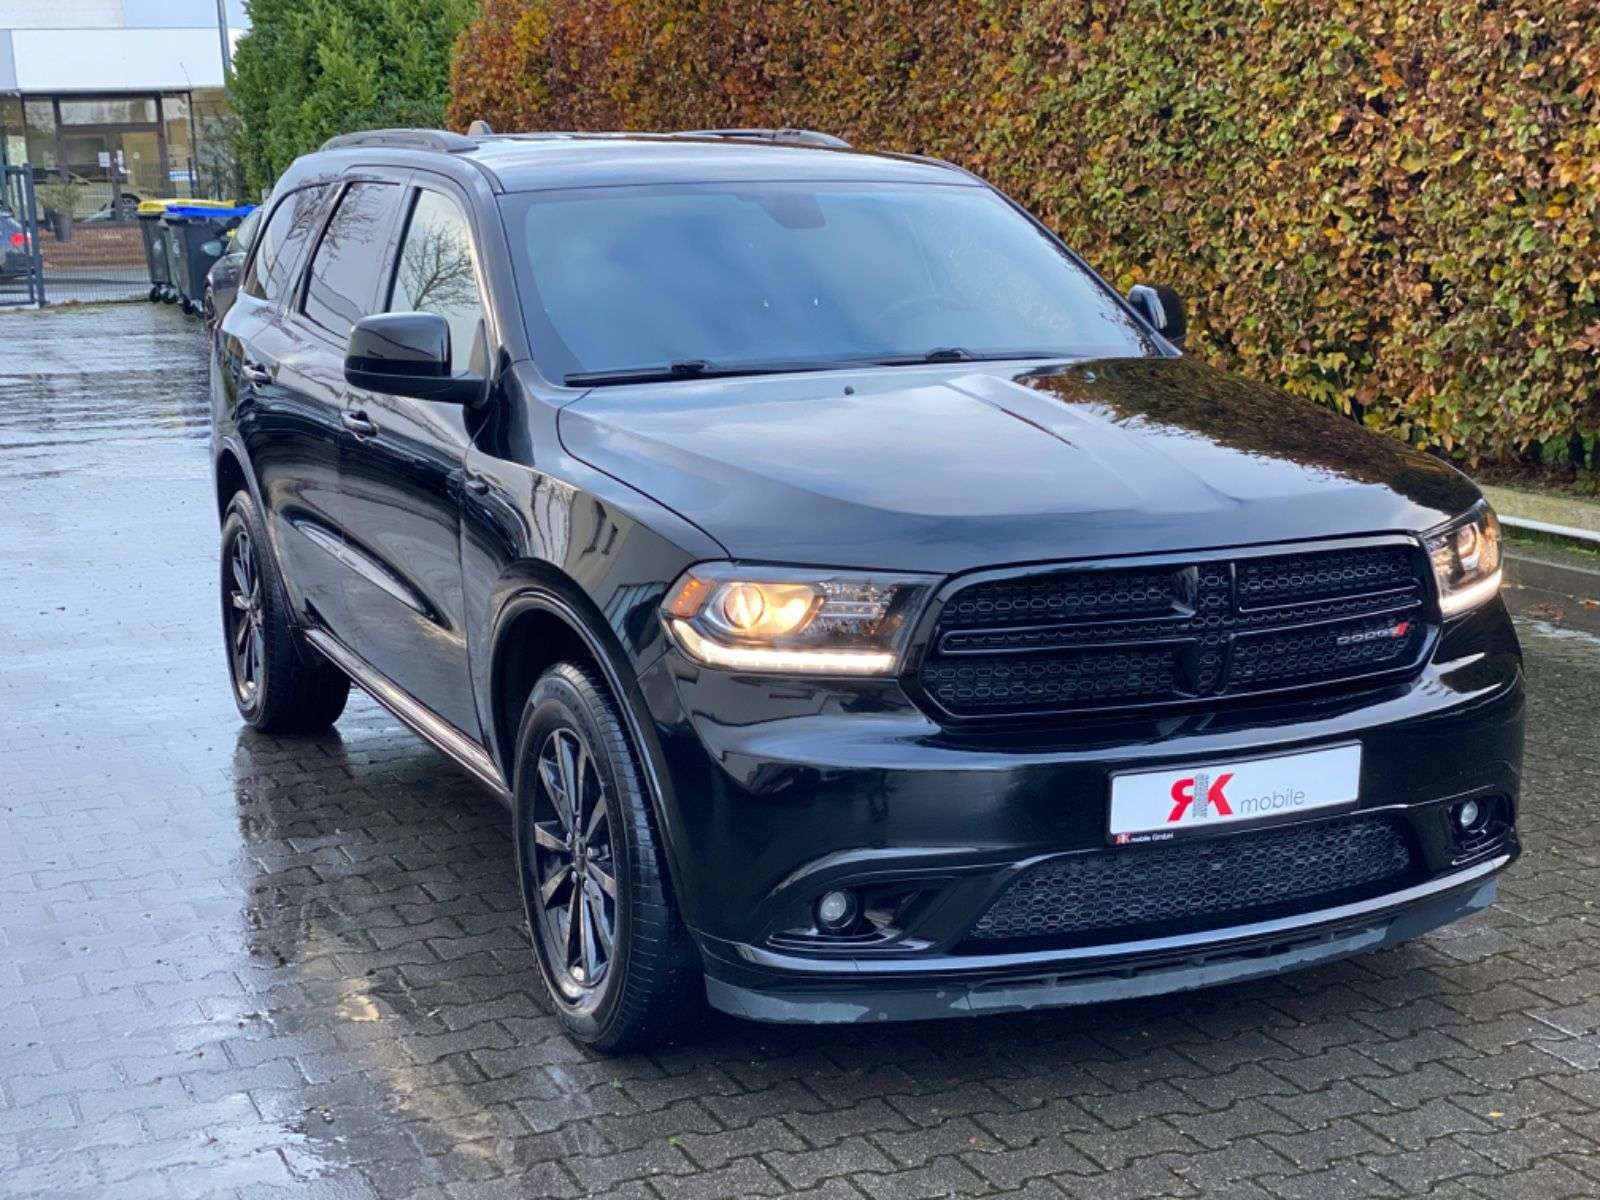 Dodge Durango Off-Road/Pick-up in Black used in Syke for € 27,800.-